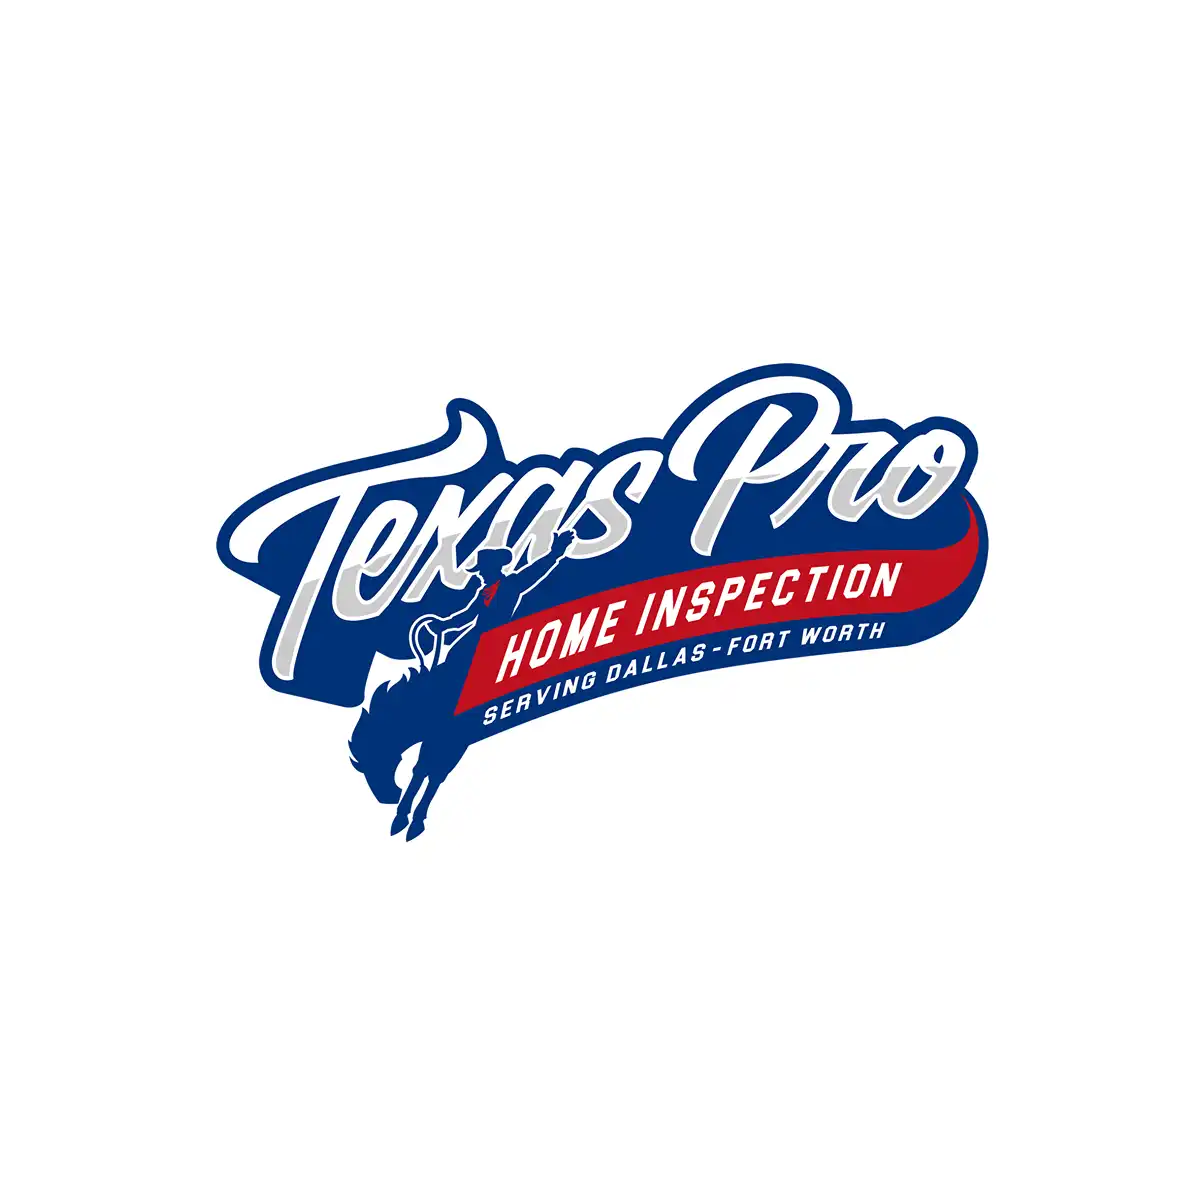 Texas Pro Home Inspection